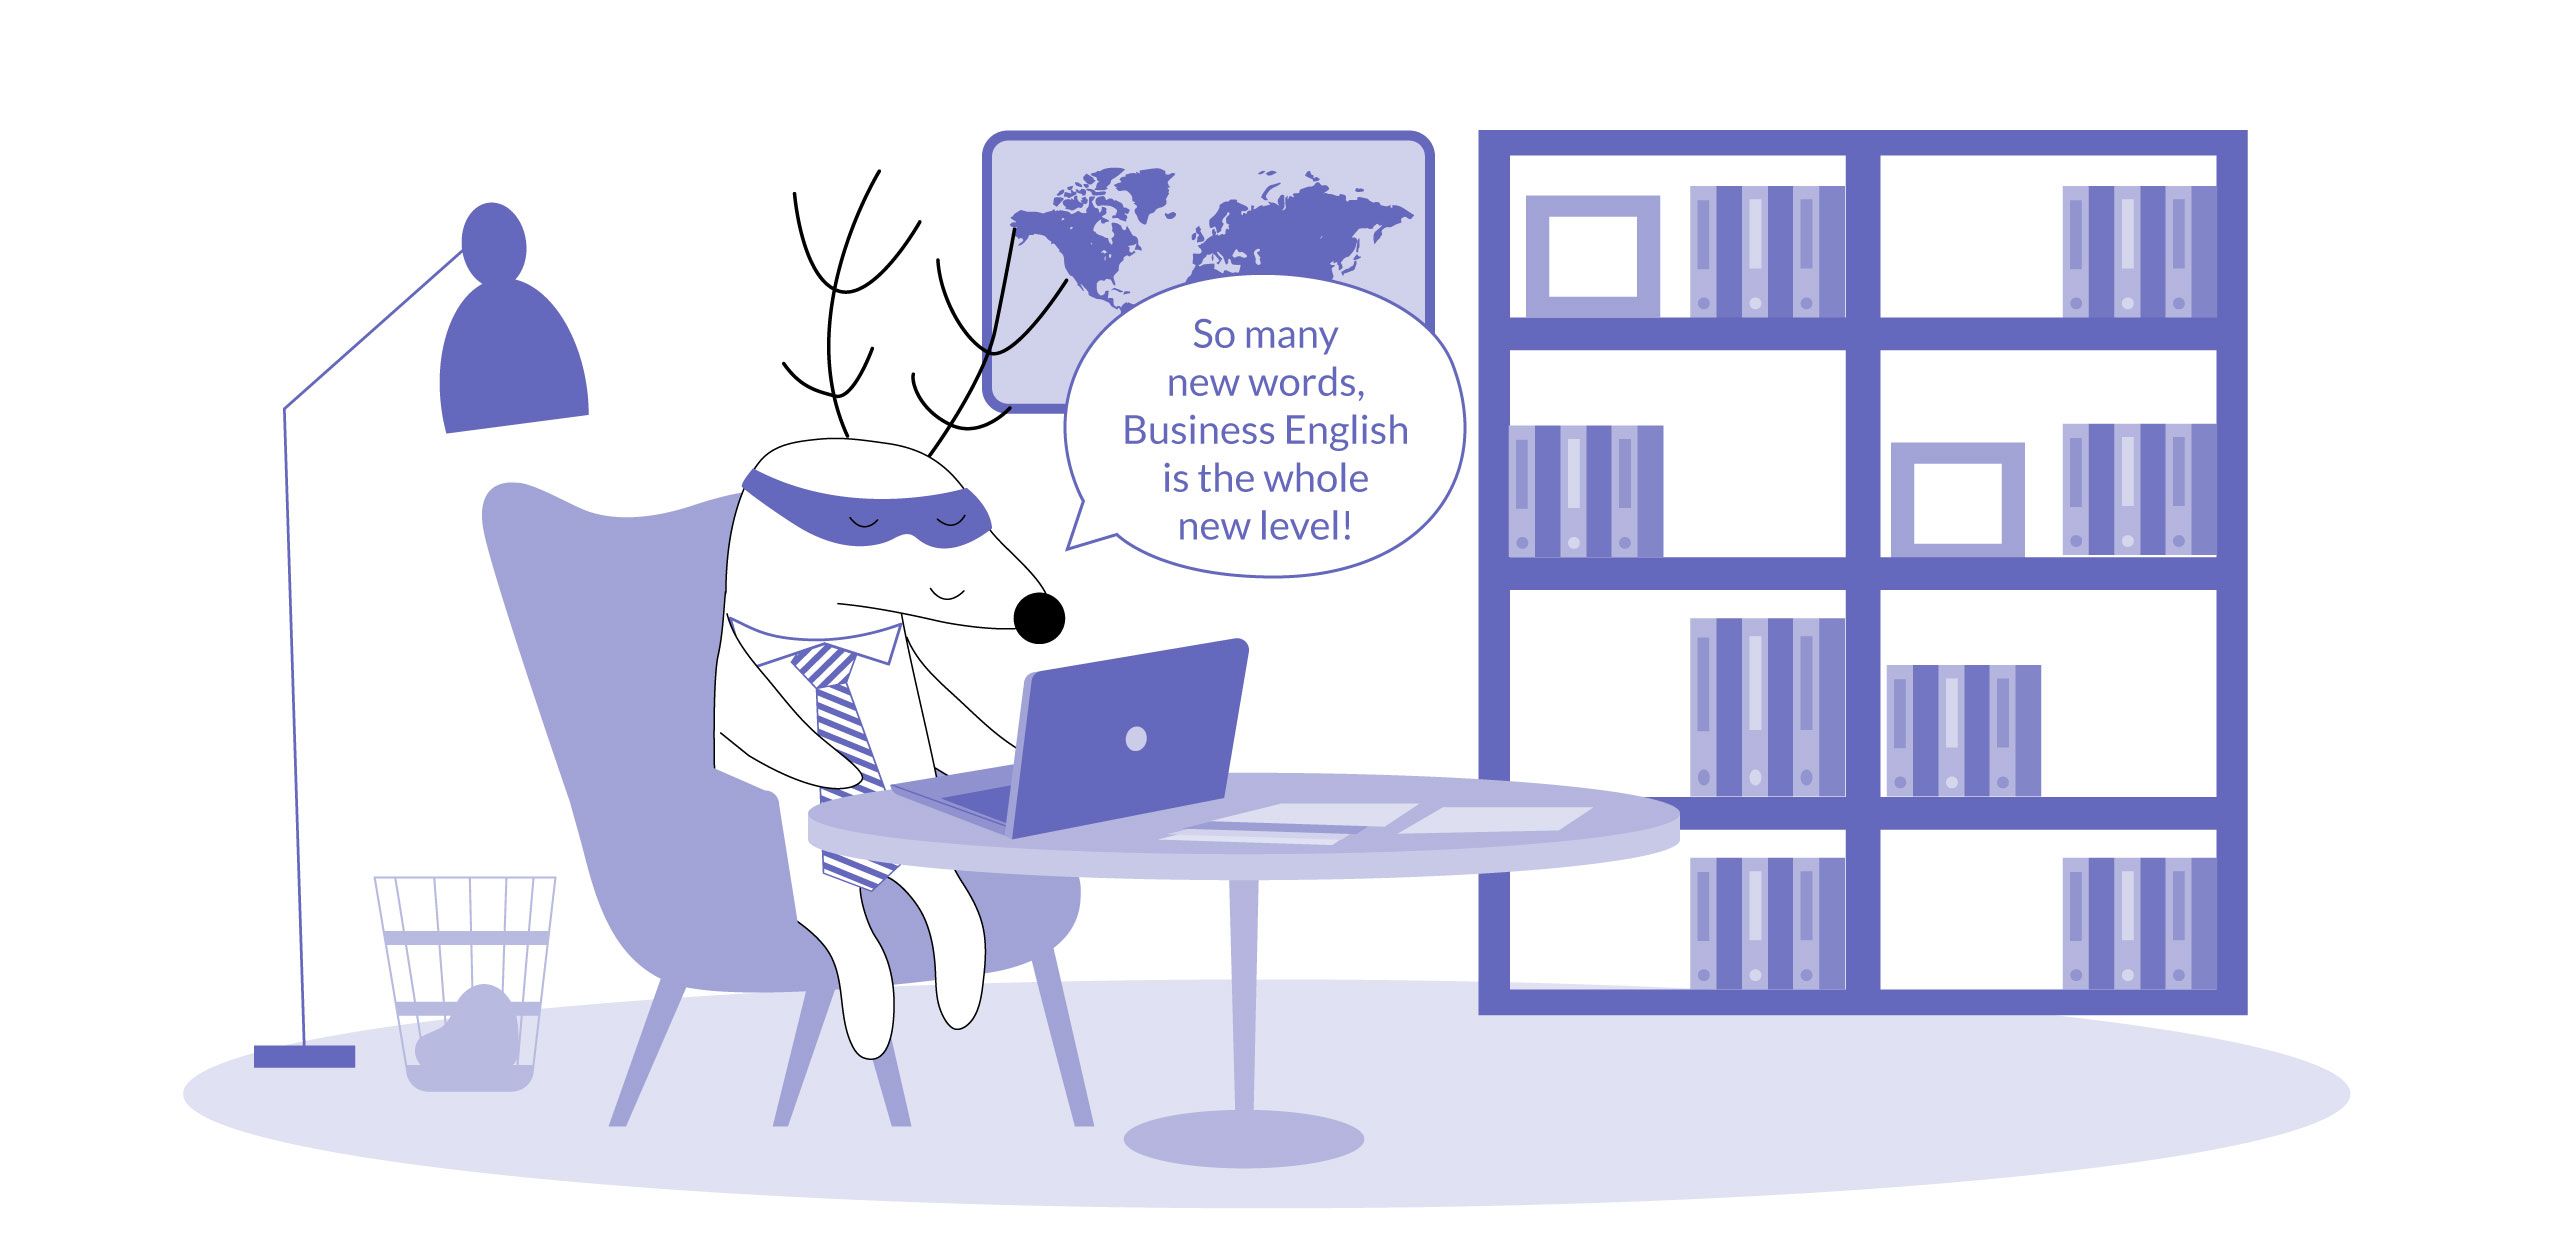 A character learning business English